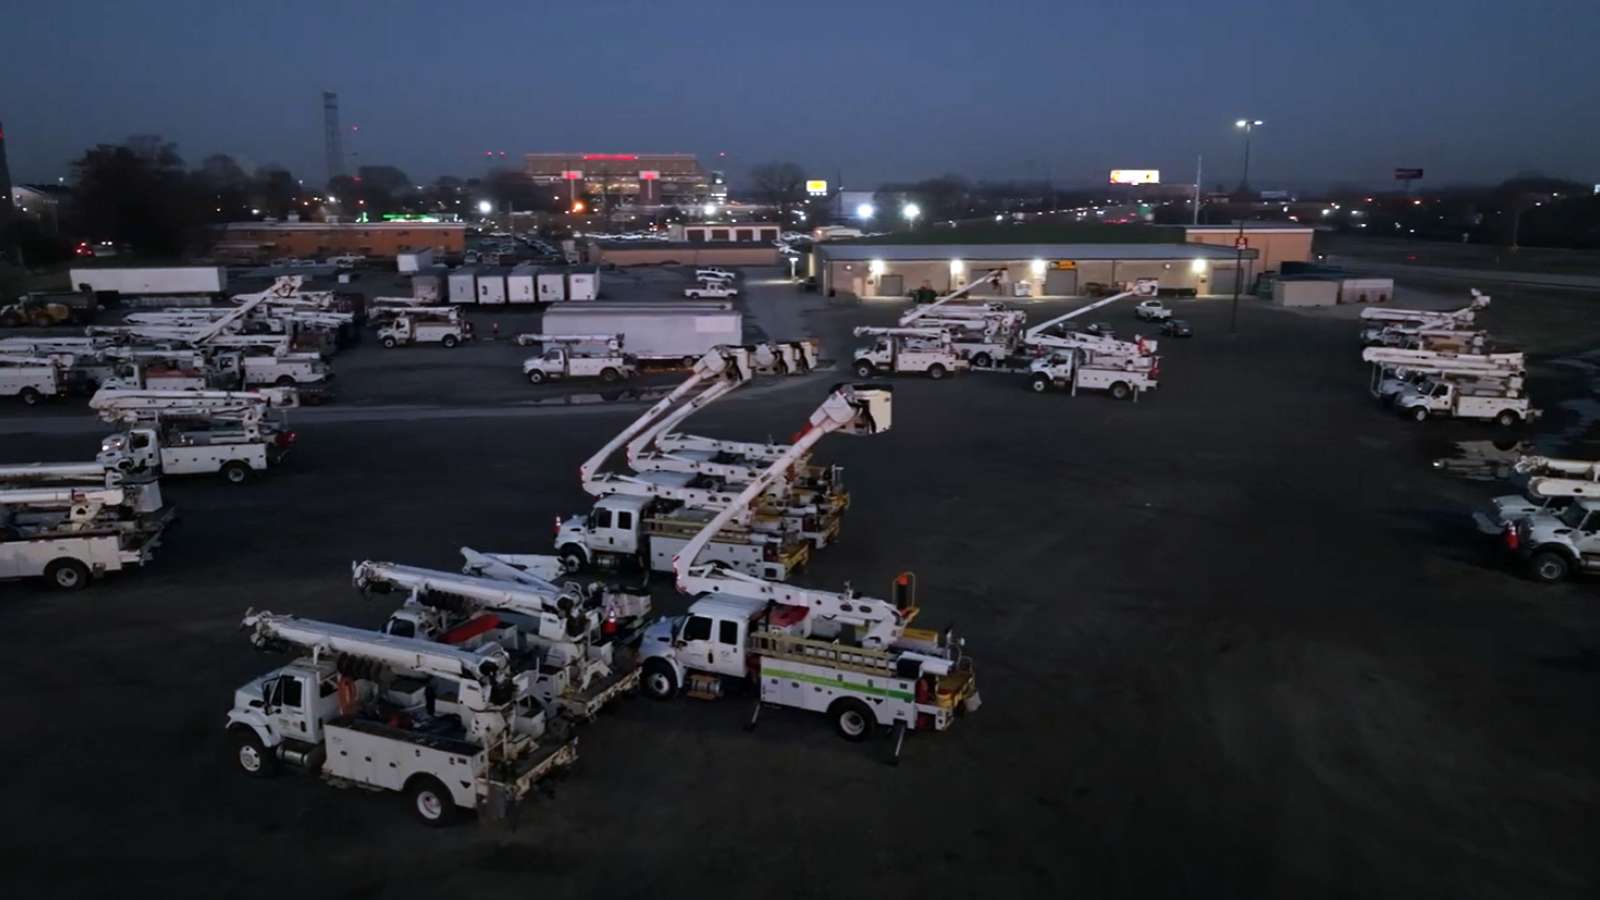 drone shot of bucket trucks staging at fairgrounds